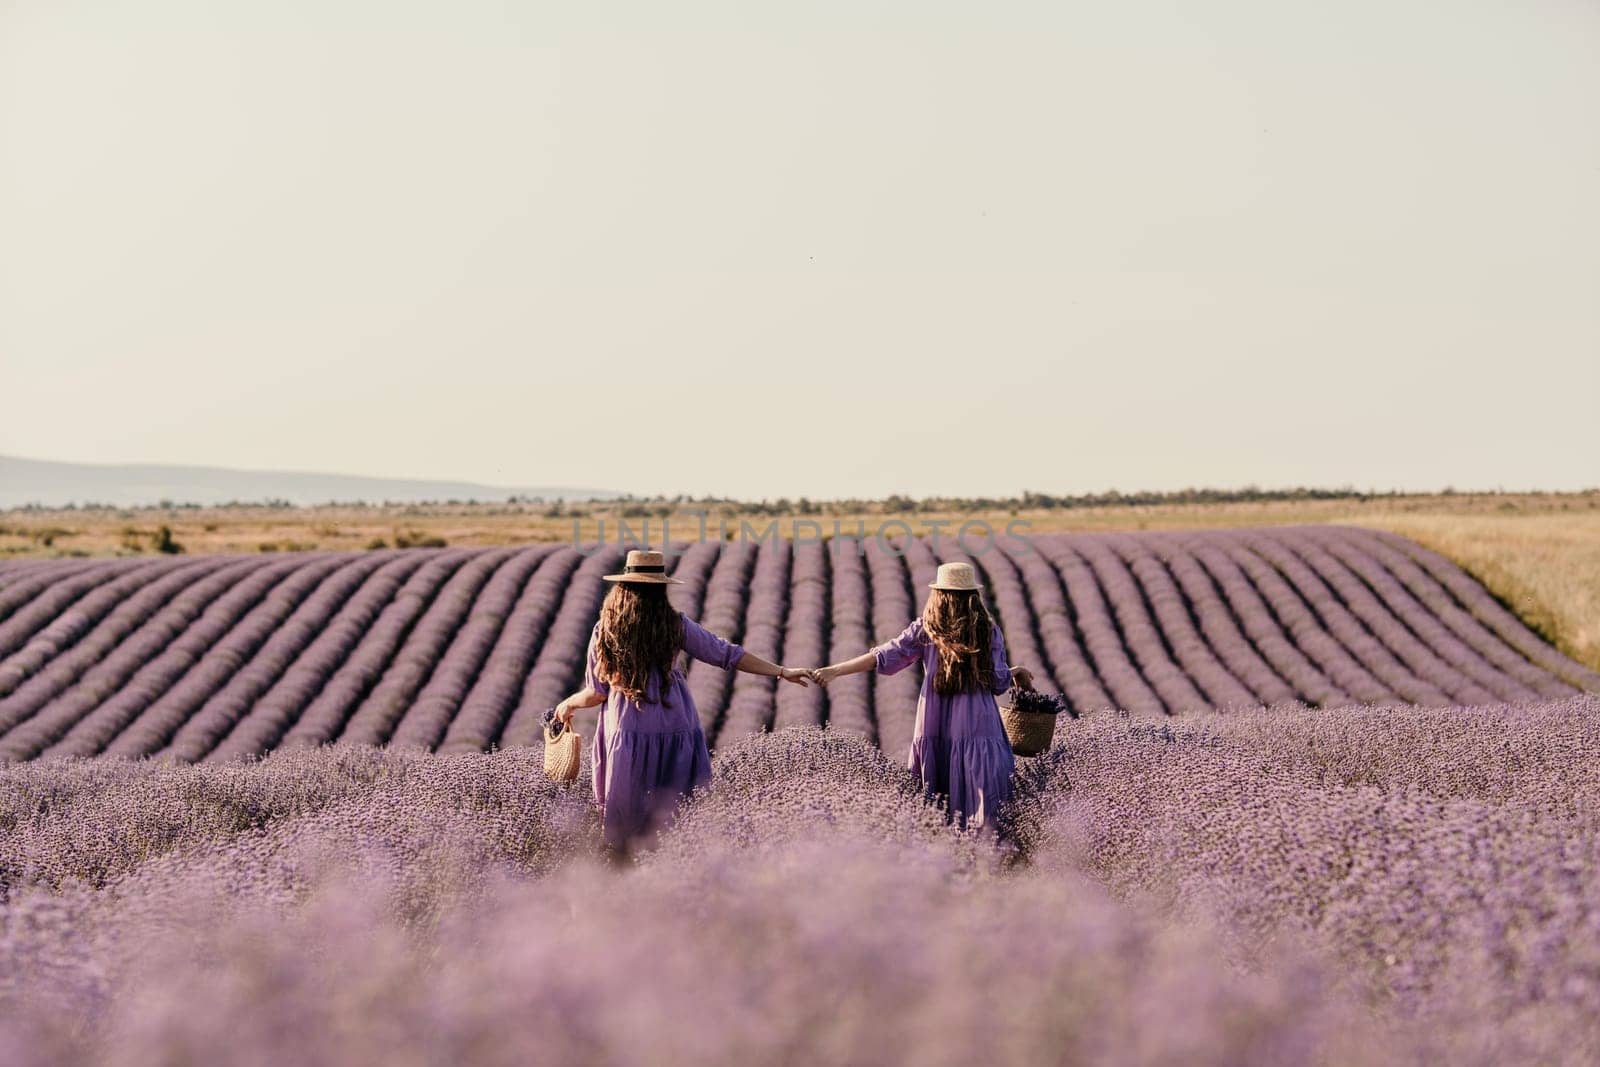 Mom and daughter are running through a lavender field dressed in purple dresses, long hair flowing and wearing hats. The field is full of purple flowers and the sky is clear. by Matiunina